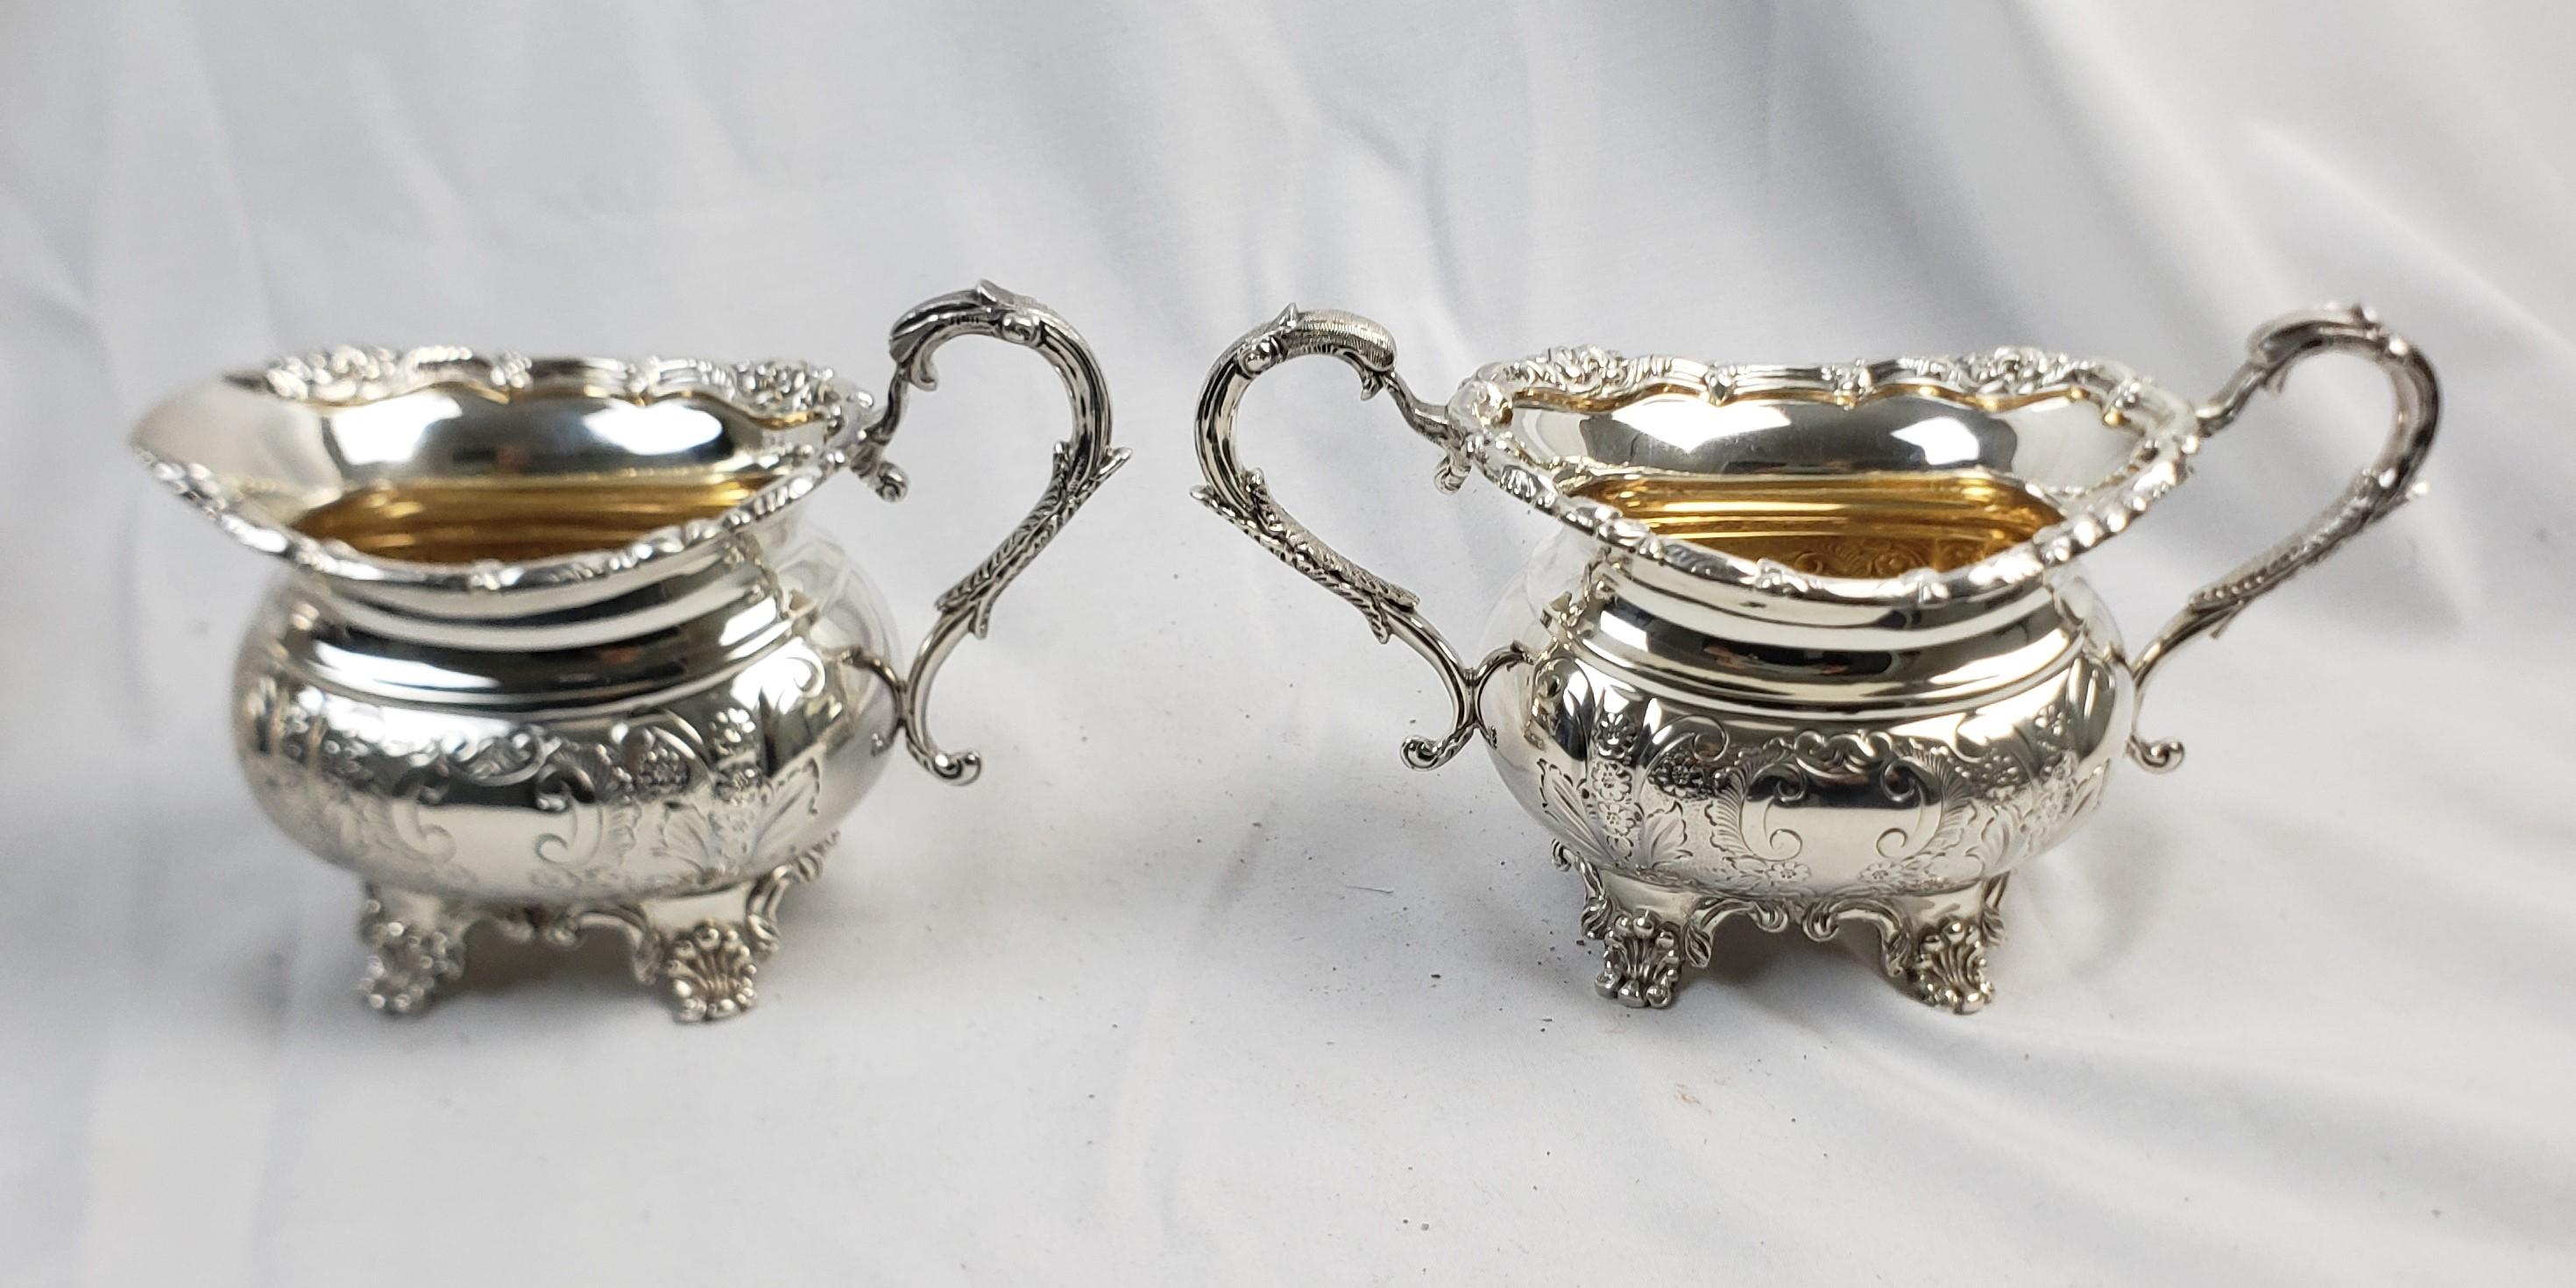 19th Century Antique English Sterling Silver Tea Set on Huge Silver Plated Serving Tray For Sale